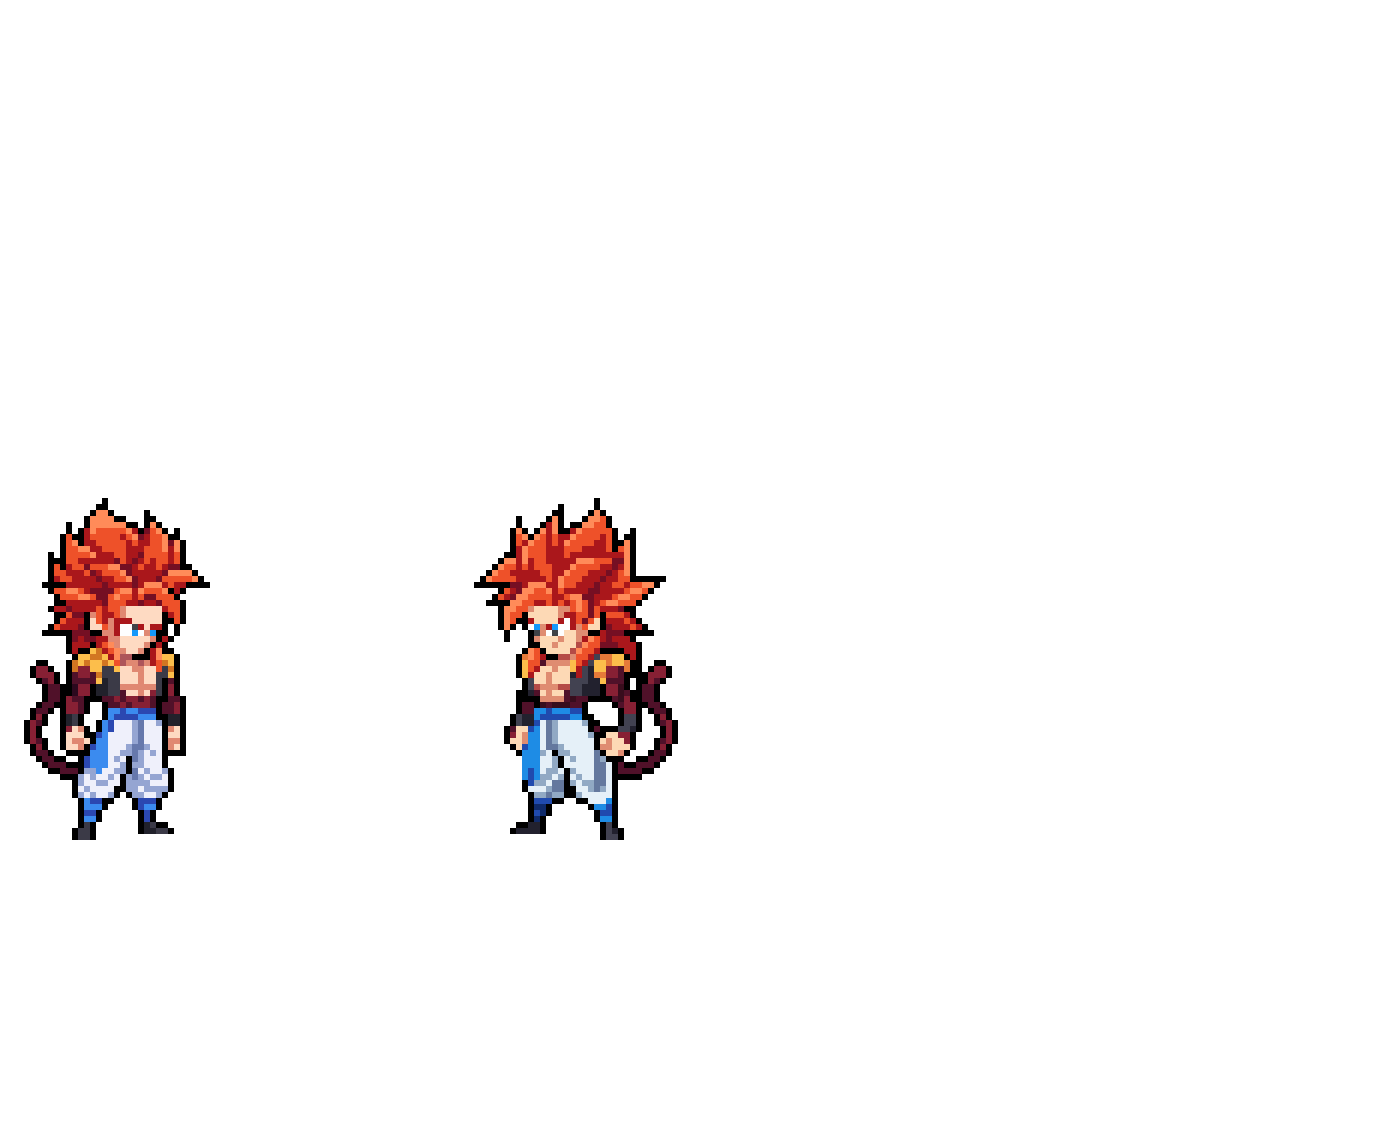 Ss4-gogeta GIFs - Find & Share on GIPHY